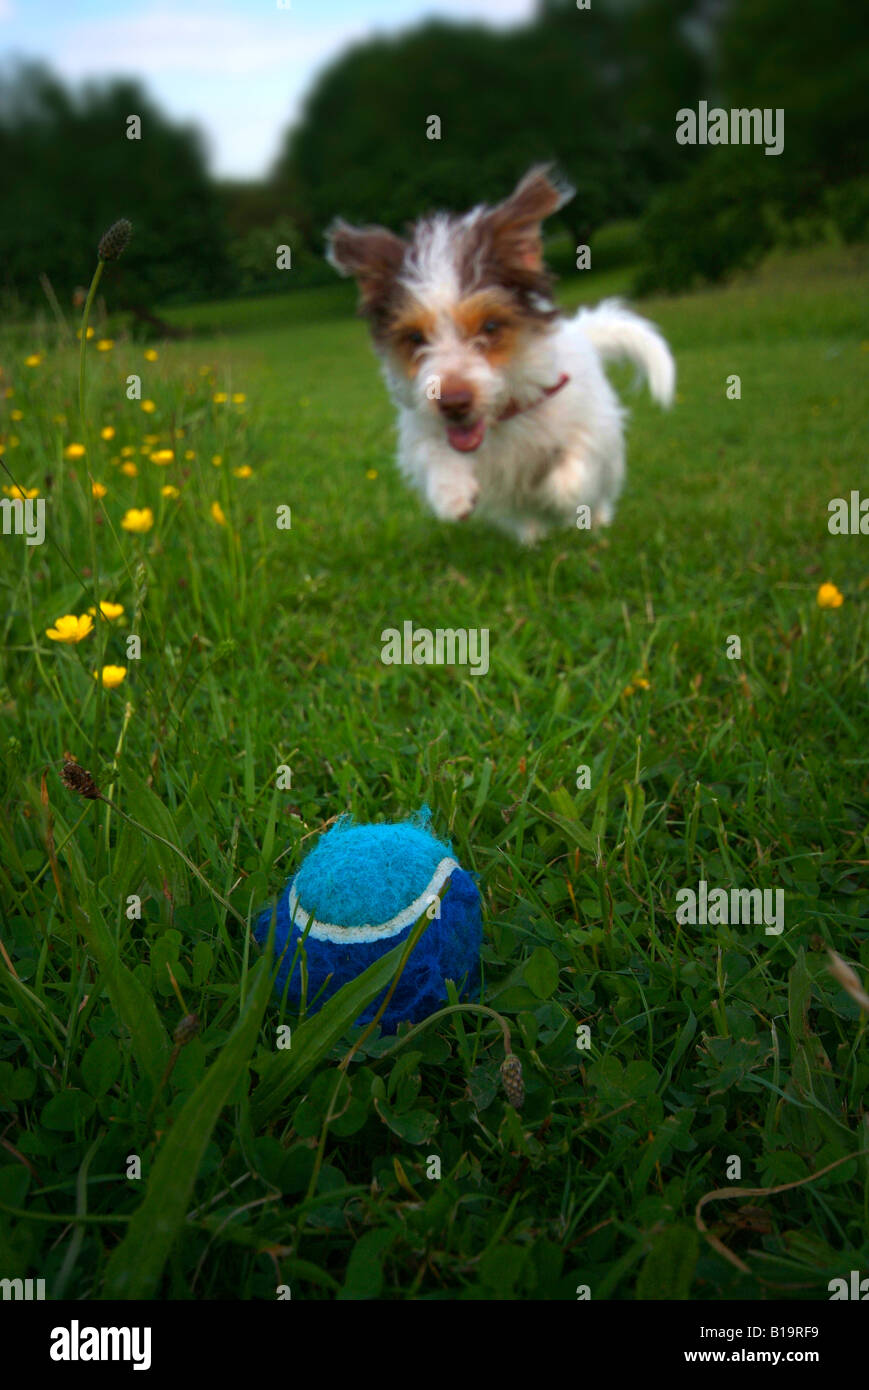 A small dog playing with a ball in a garden Stock Photo